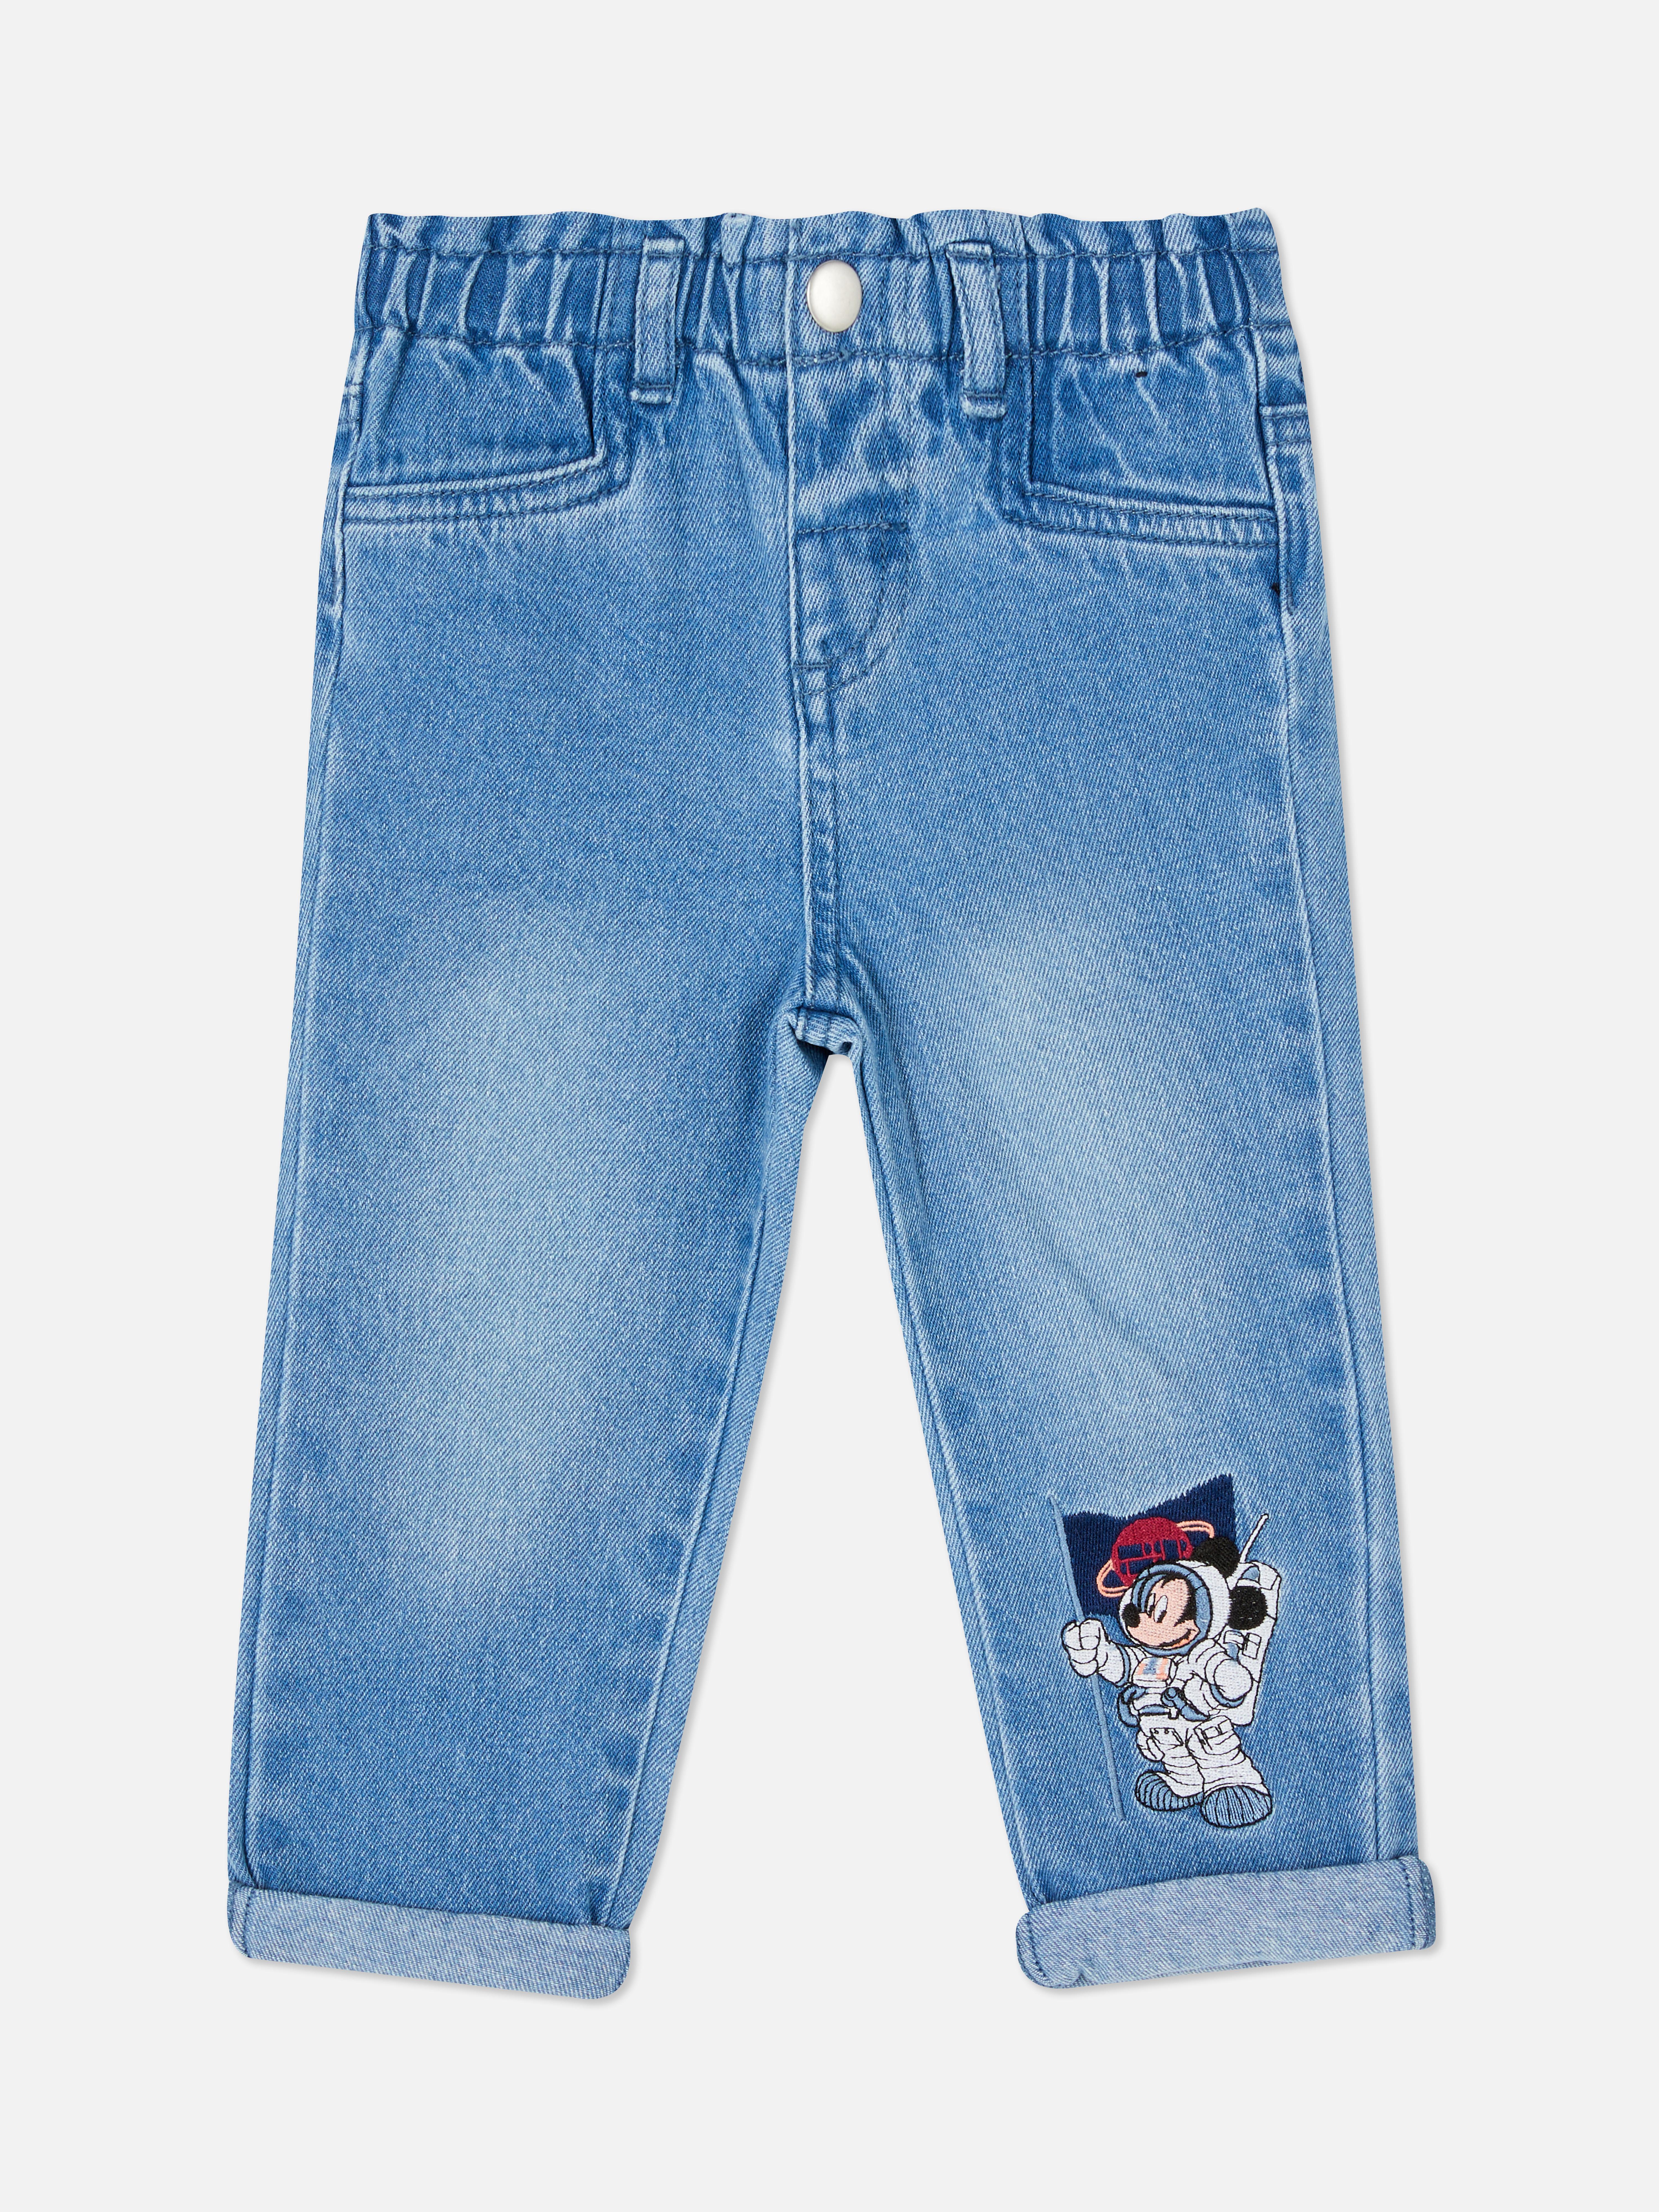 Disney's Mickey Mouse Embroidered Jeans